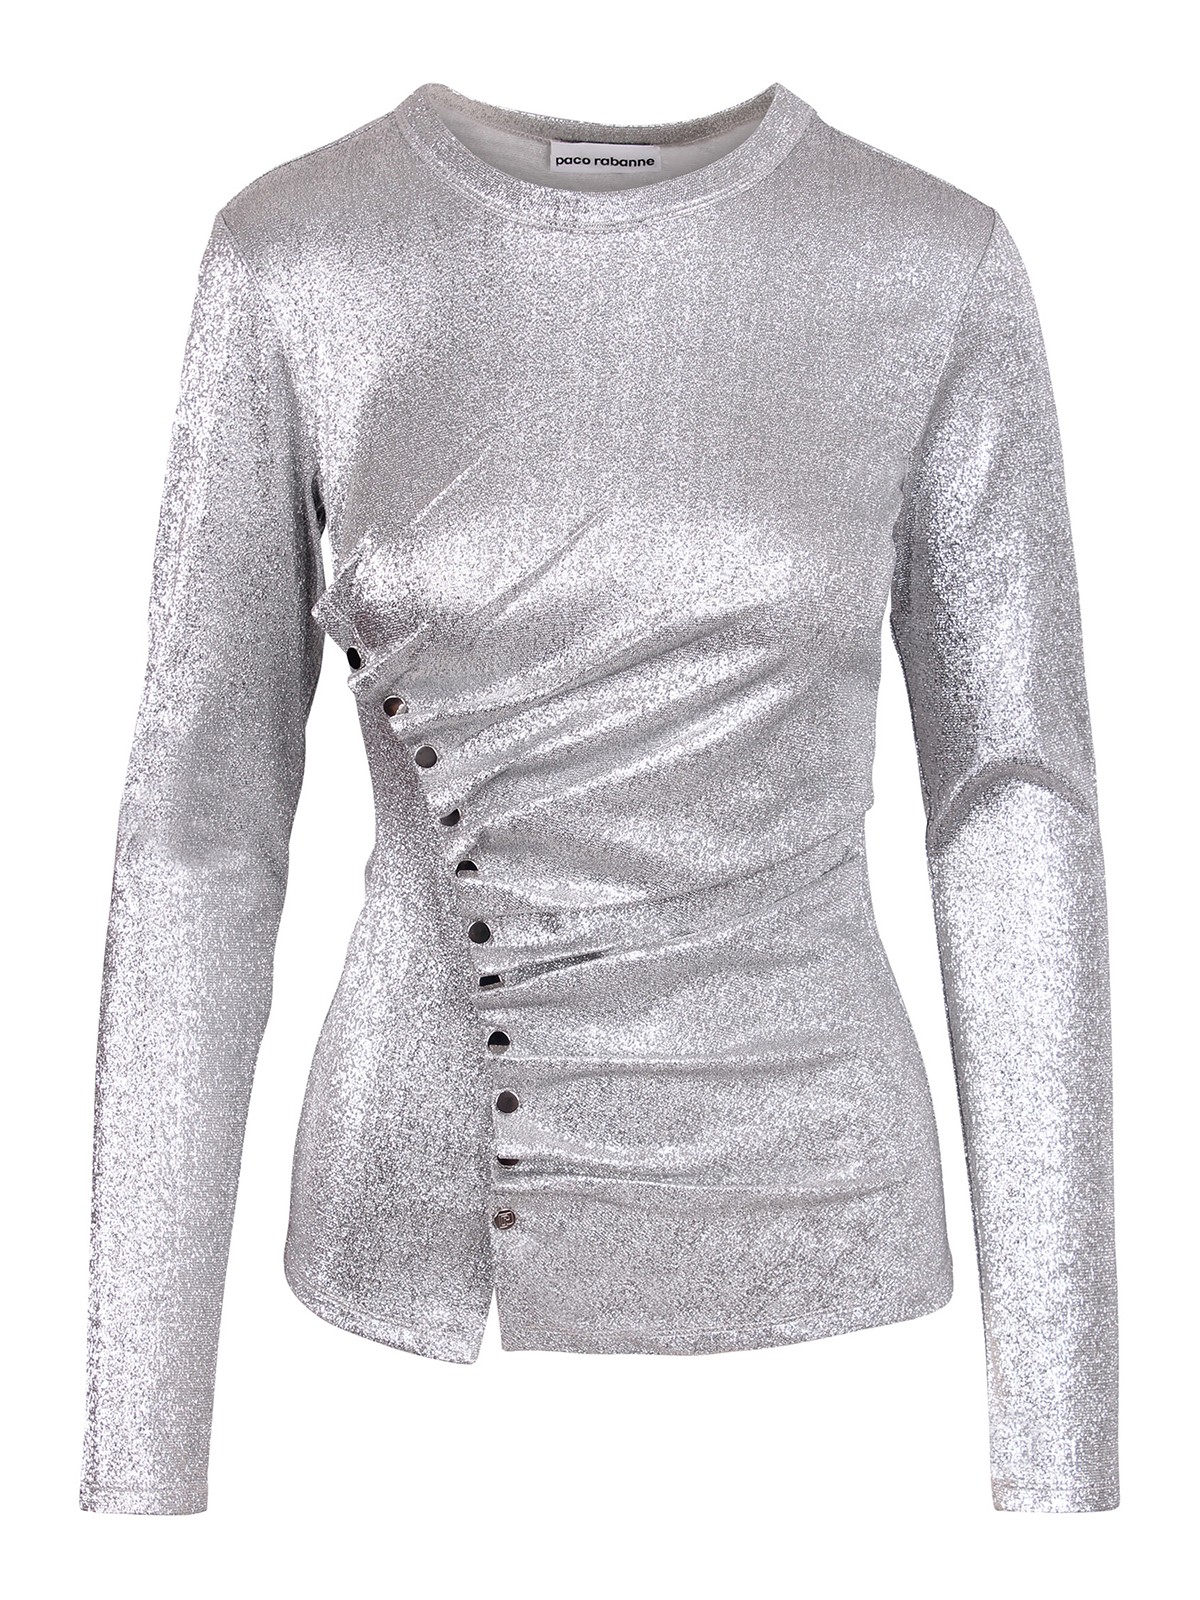 Paco Rabanne Draped Top In Silver